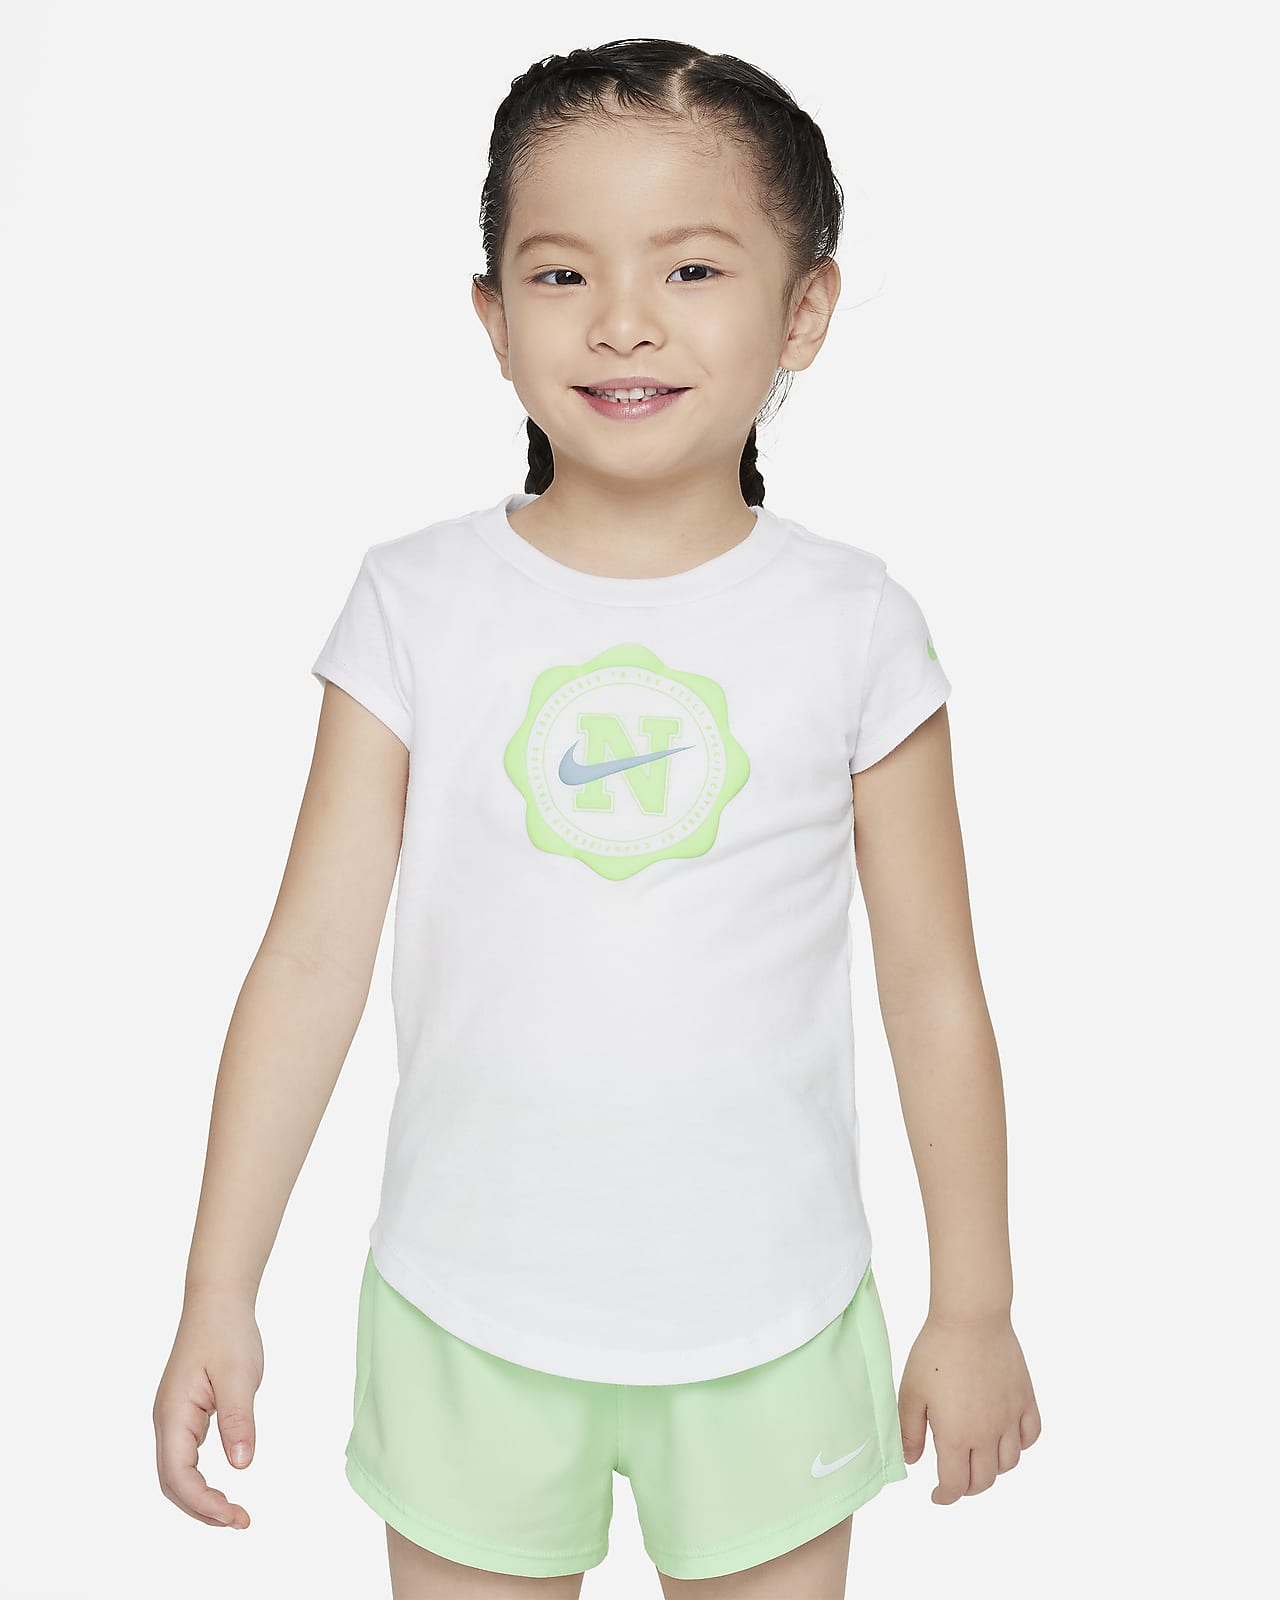 Nike Prep in Your Step Toddler Graphic T-Shirt